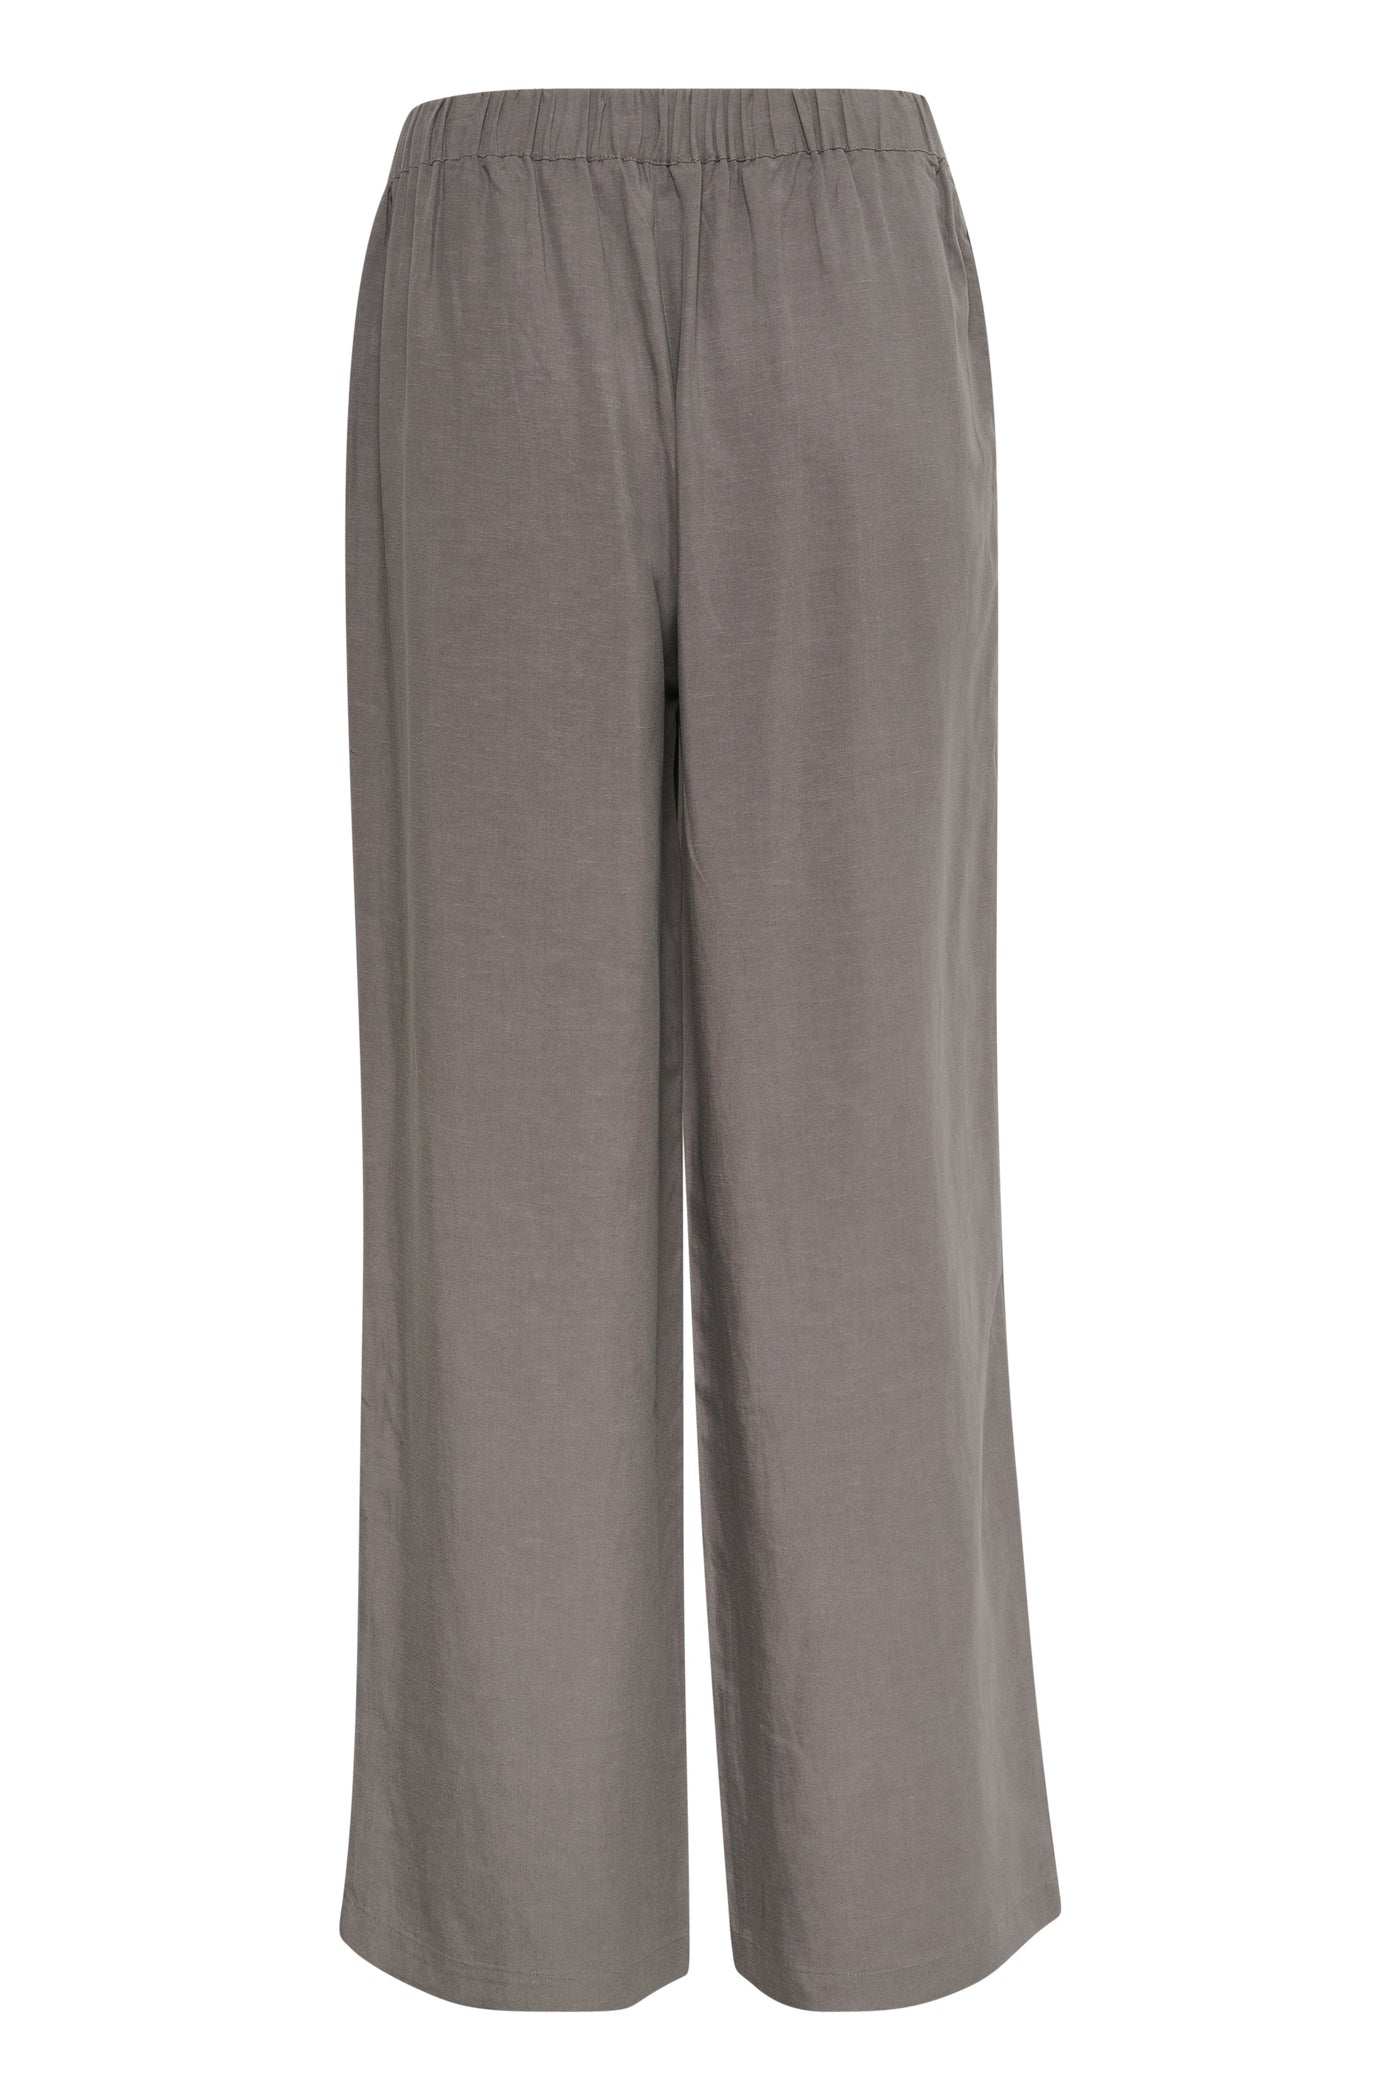 Lounge Nine AfieLN Pants-Womens-Ohh! By Gum - Shop Sustainable